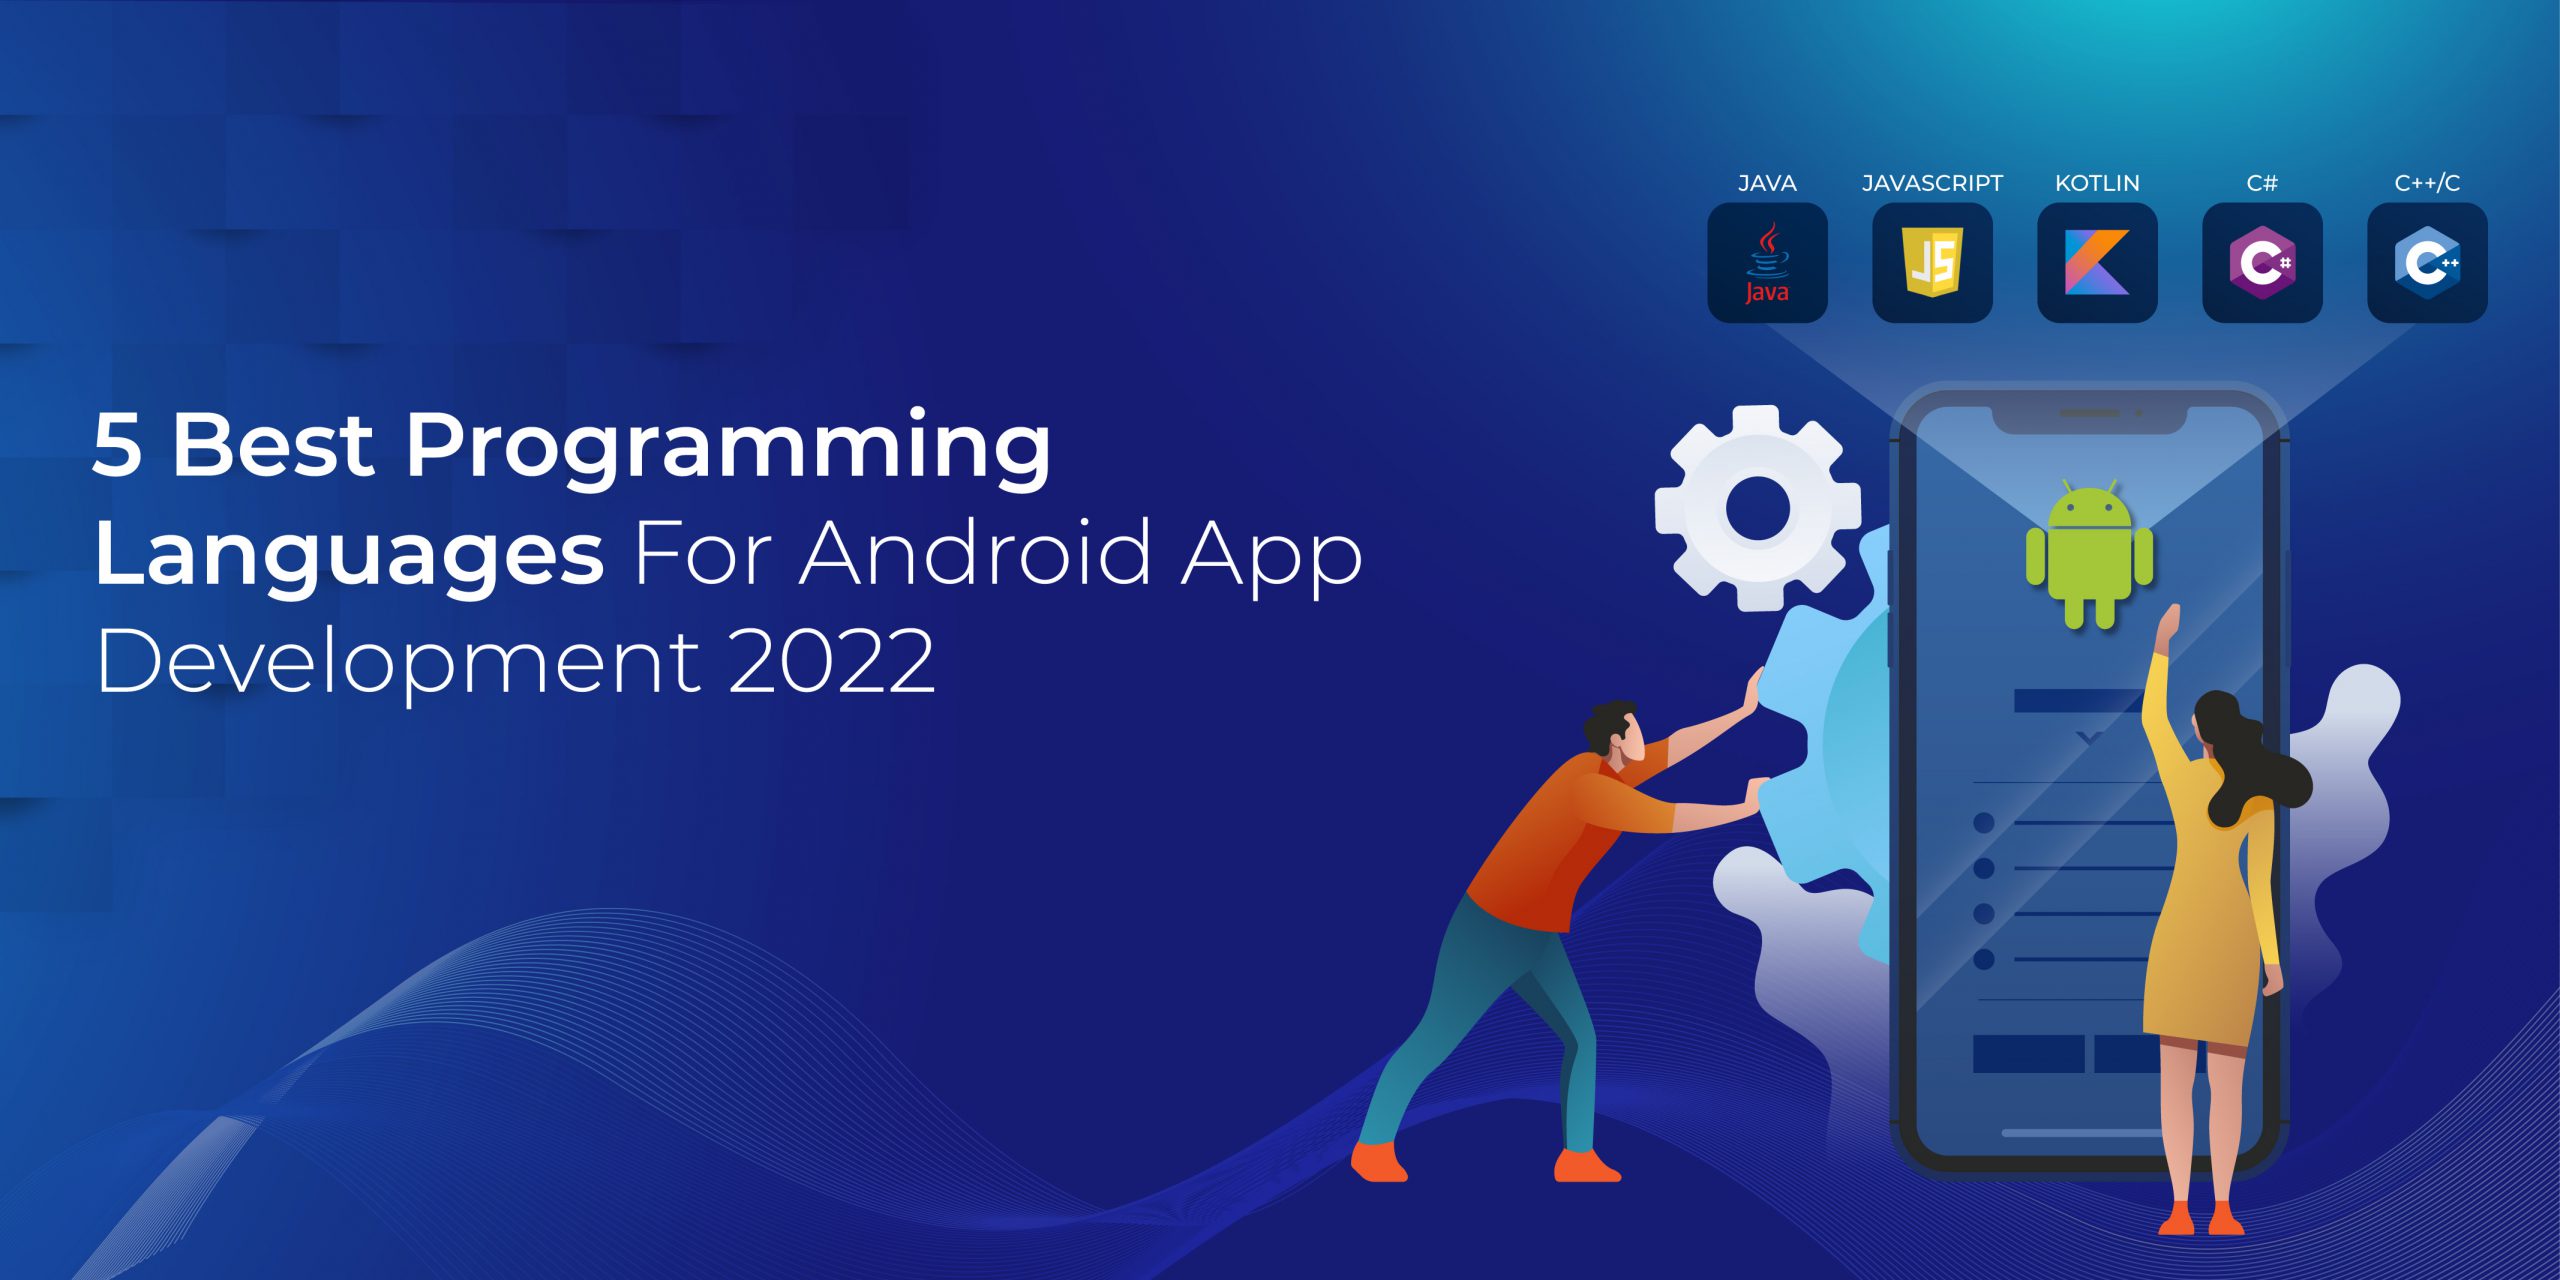 5 Best Programming Languages For Android App Development 2022